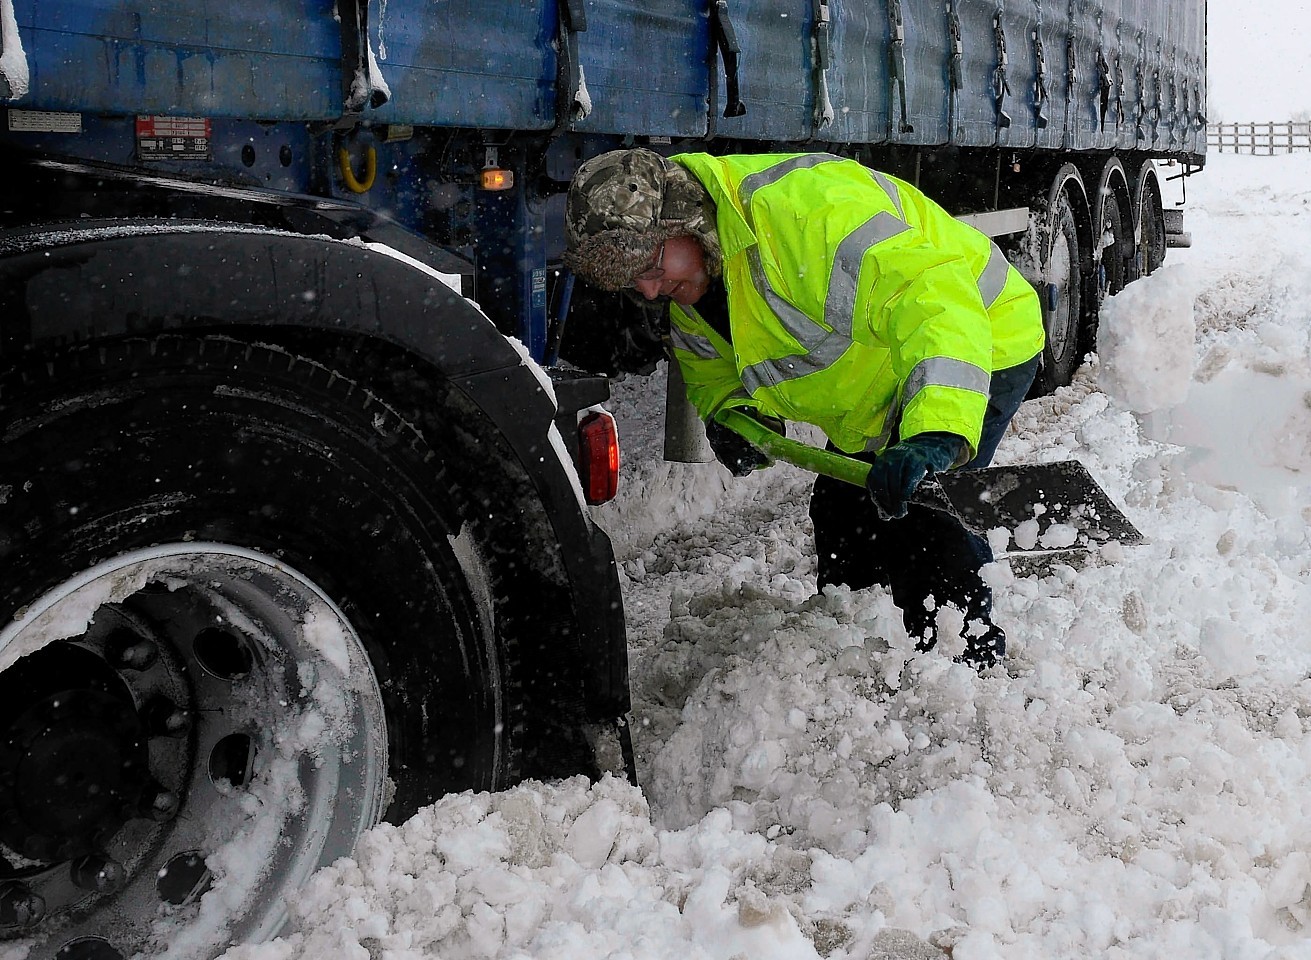 Drivers on the A9 have been particularly badly hit, with a number of lorries becoming stuck in the snow 